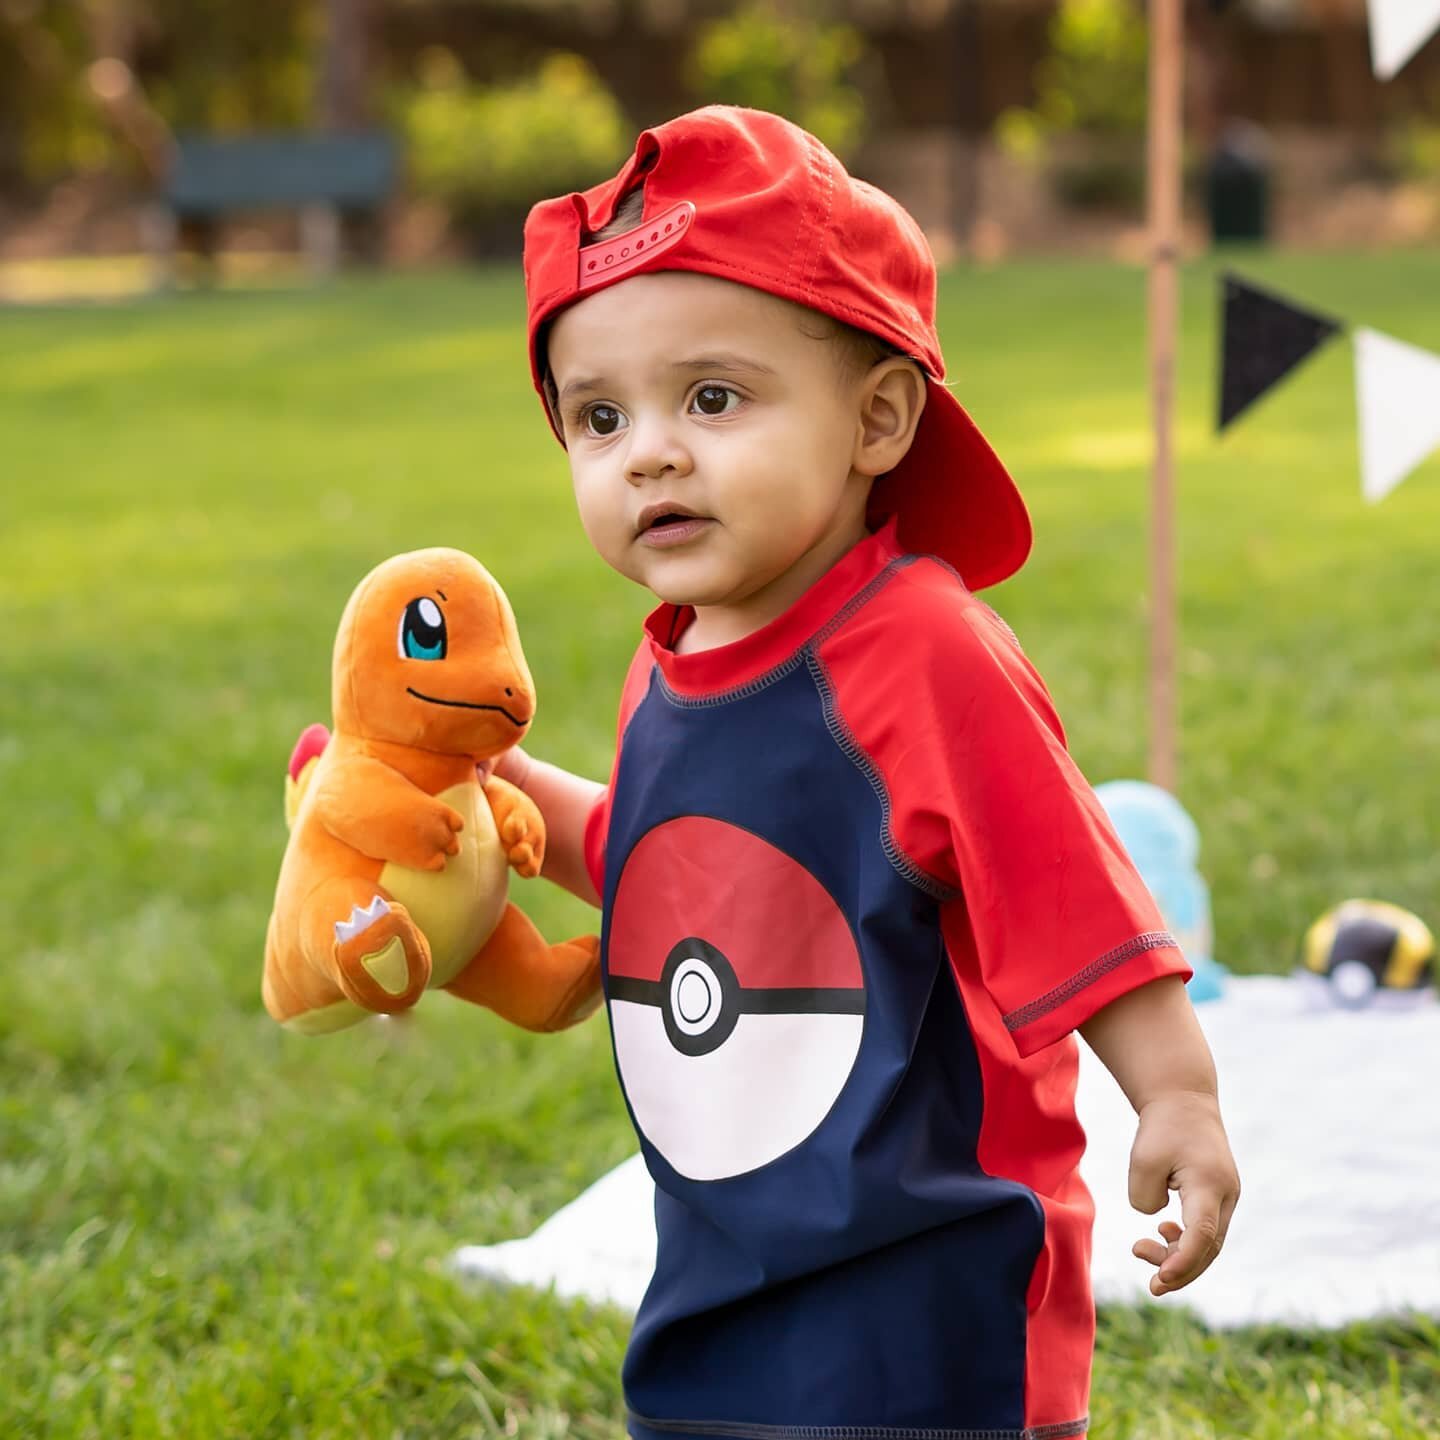 #charmander I choose YOU!
.
This little future @pokemon trainer just picked his starter Pokemon, and we were there to capture it! 
.
📸 @audiokitton
.
#sonyalpha #sonyphoto #sonya7sii #sonyalpha #sonyphotographer #childrensphotography #pokemon #pokem